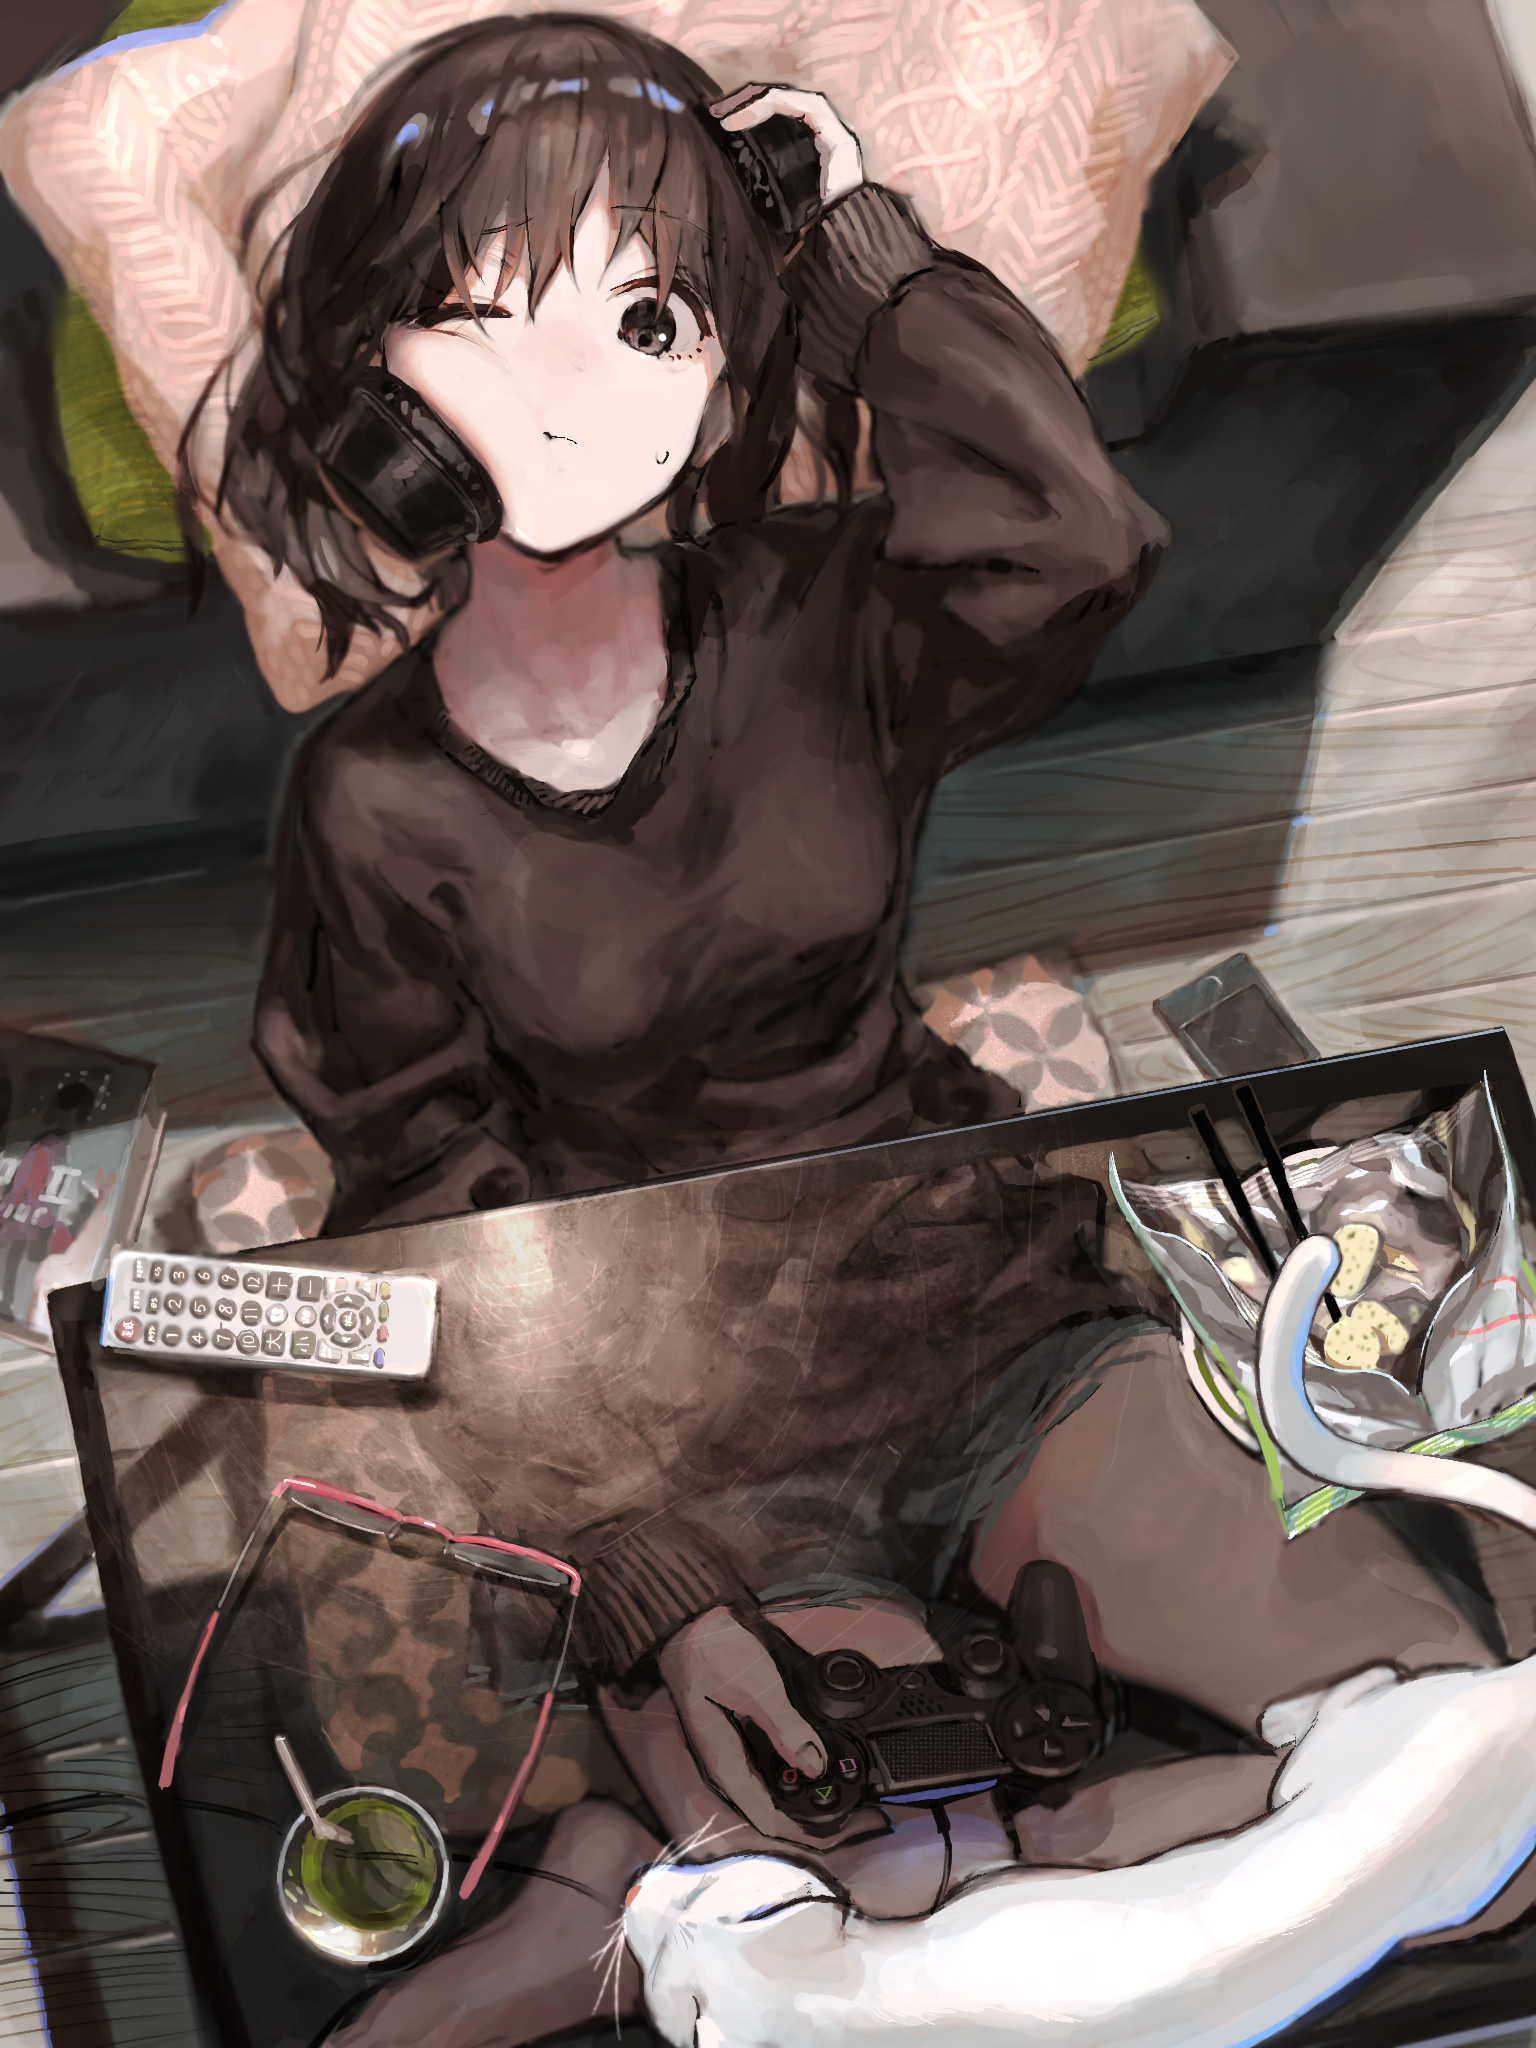 Anime Girls Original Characters Anime Brunette Top View Sweater Gamers Joystick Legs Crossed Cats Pe 1536x2048